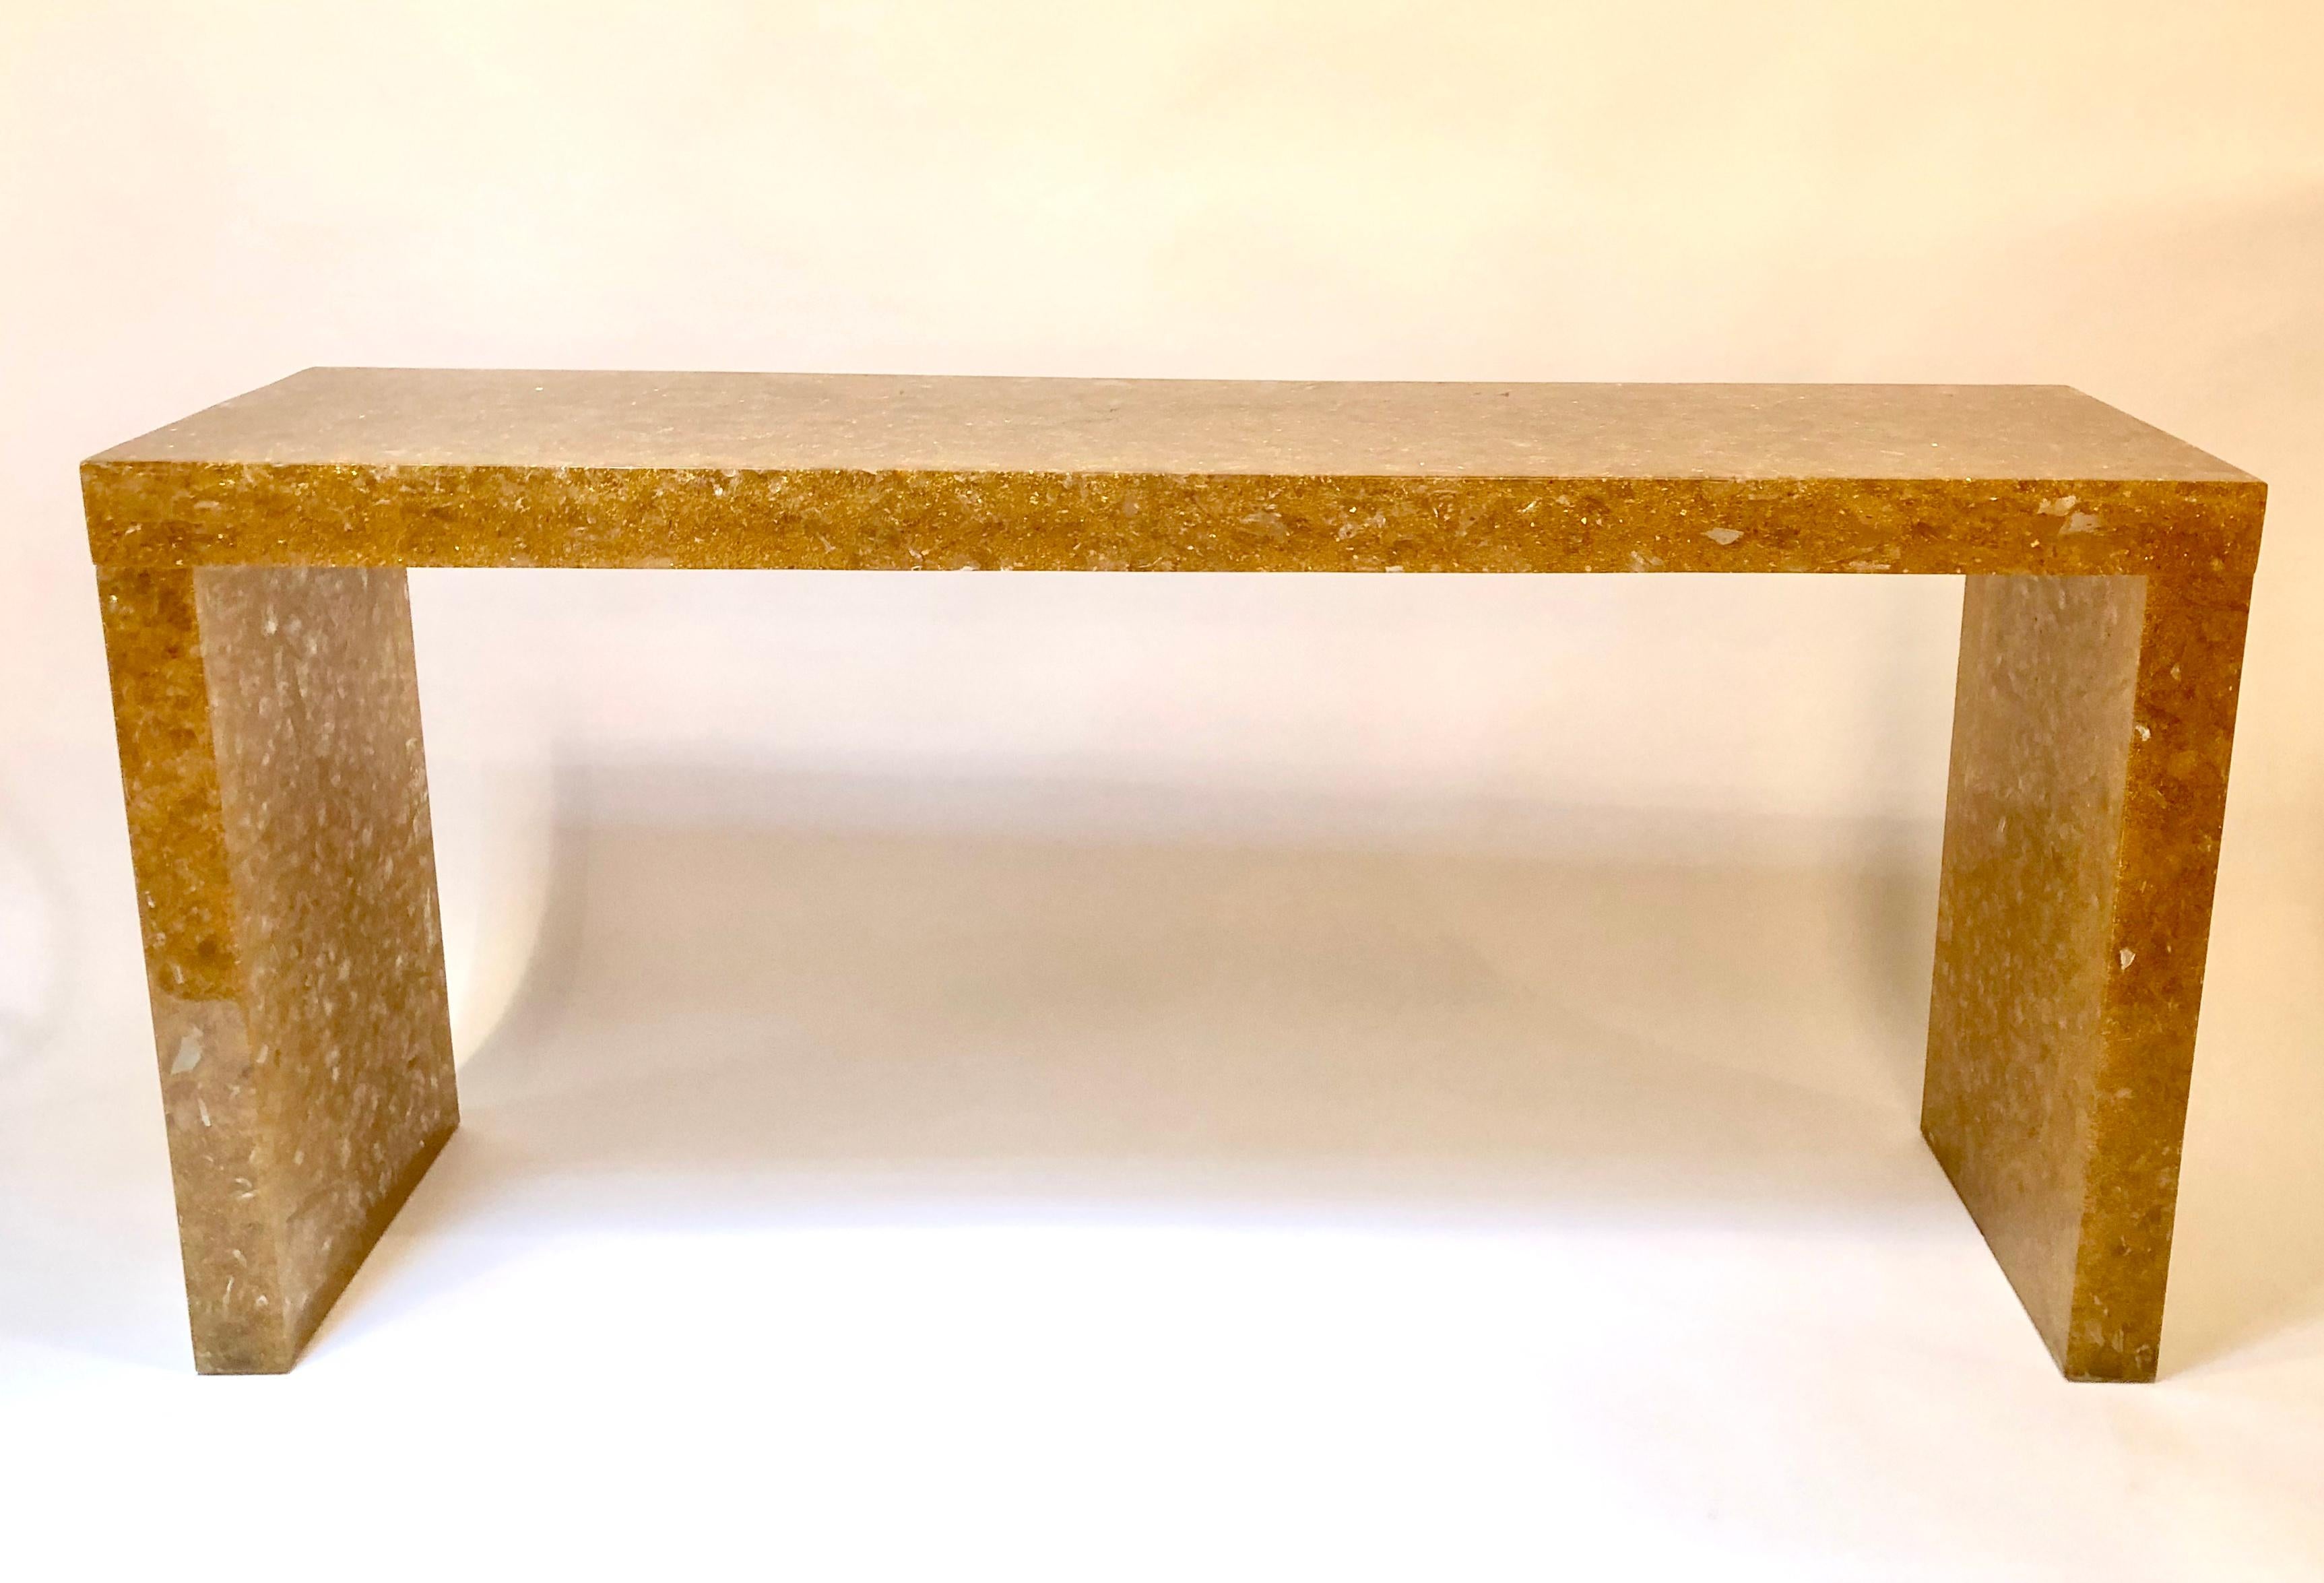 1970s amber-colored fractal resin console table designed by Marie Claude De Fouquières. Her rare works are highly sought after and this example is among the rarest of her productions. Table is made of solid fractal resin. 

From Artlogic: 
She